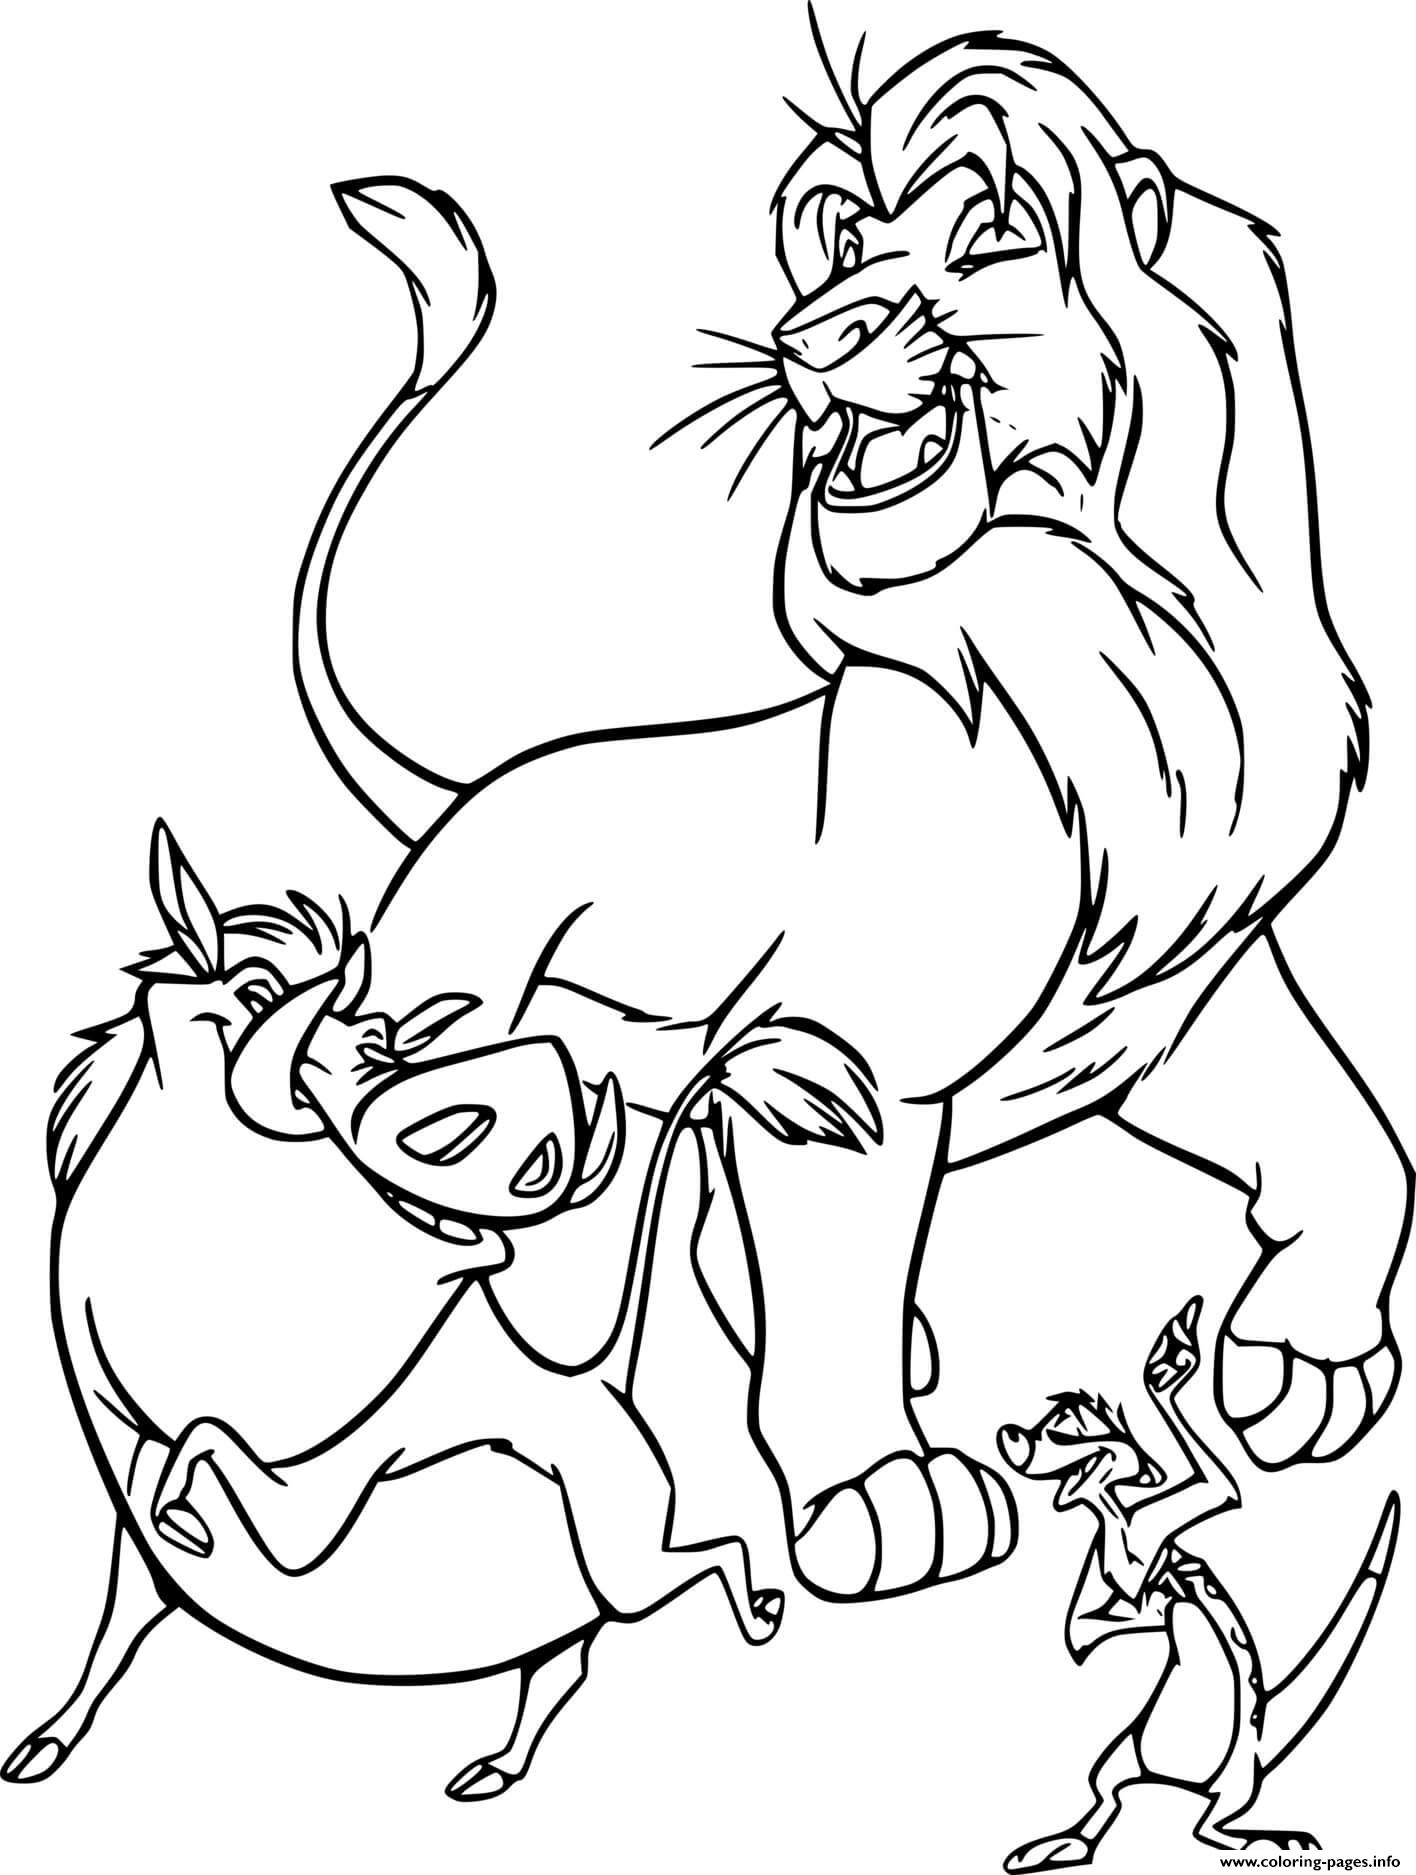 Timon And Pumbaa With Simba coloring